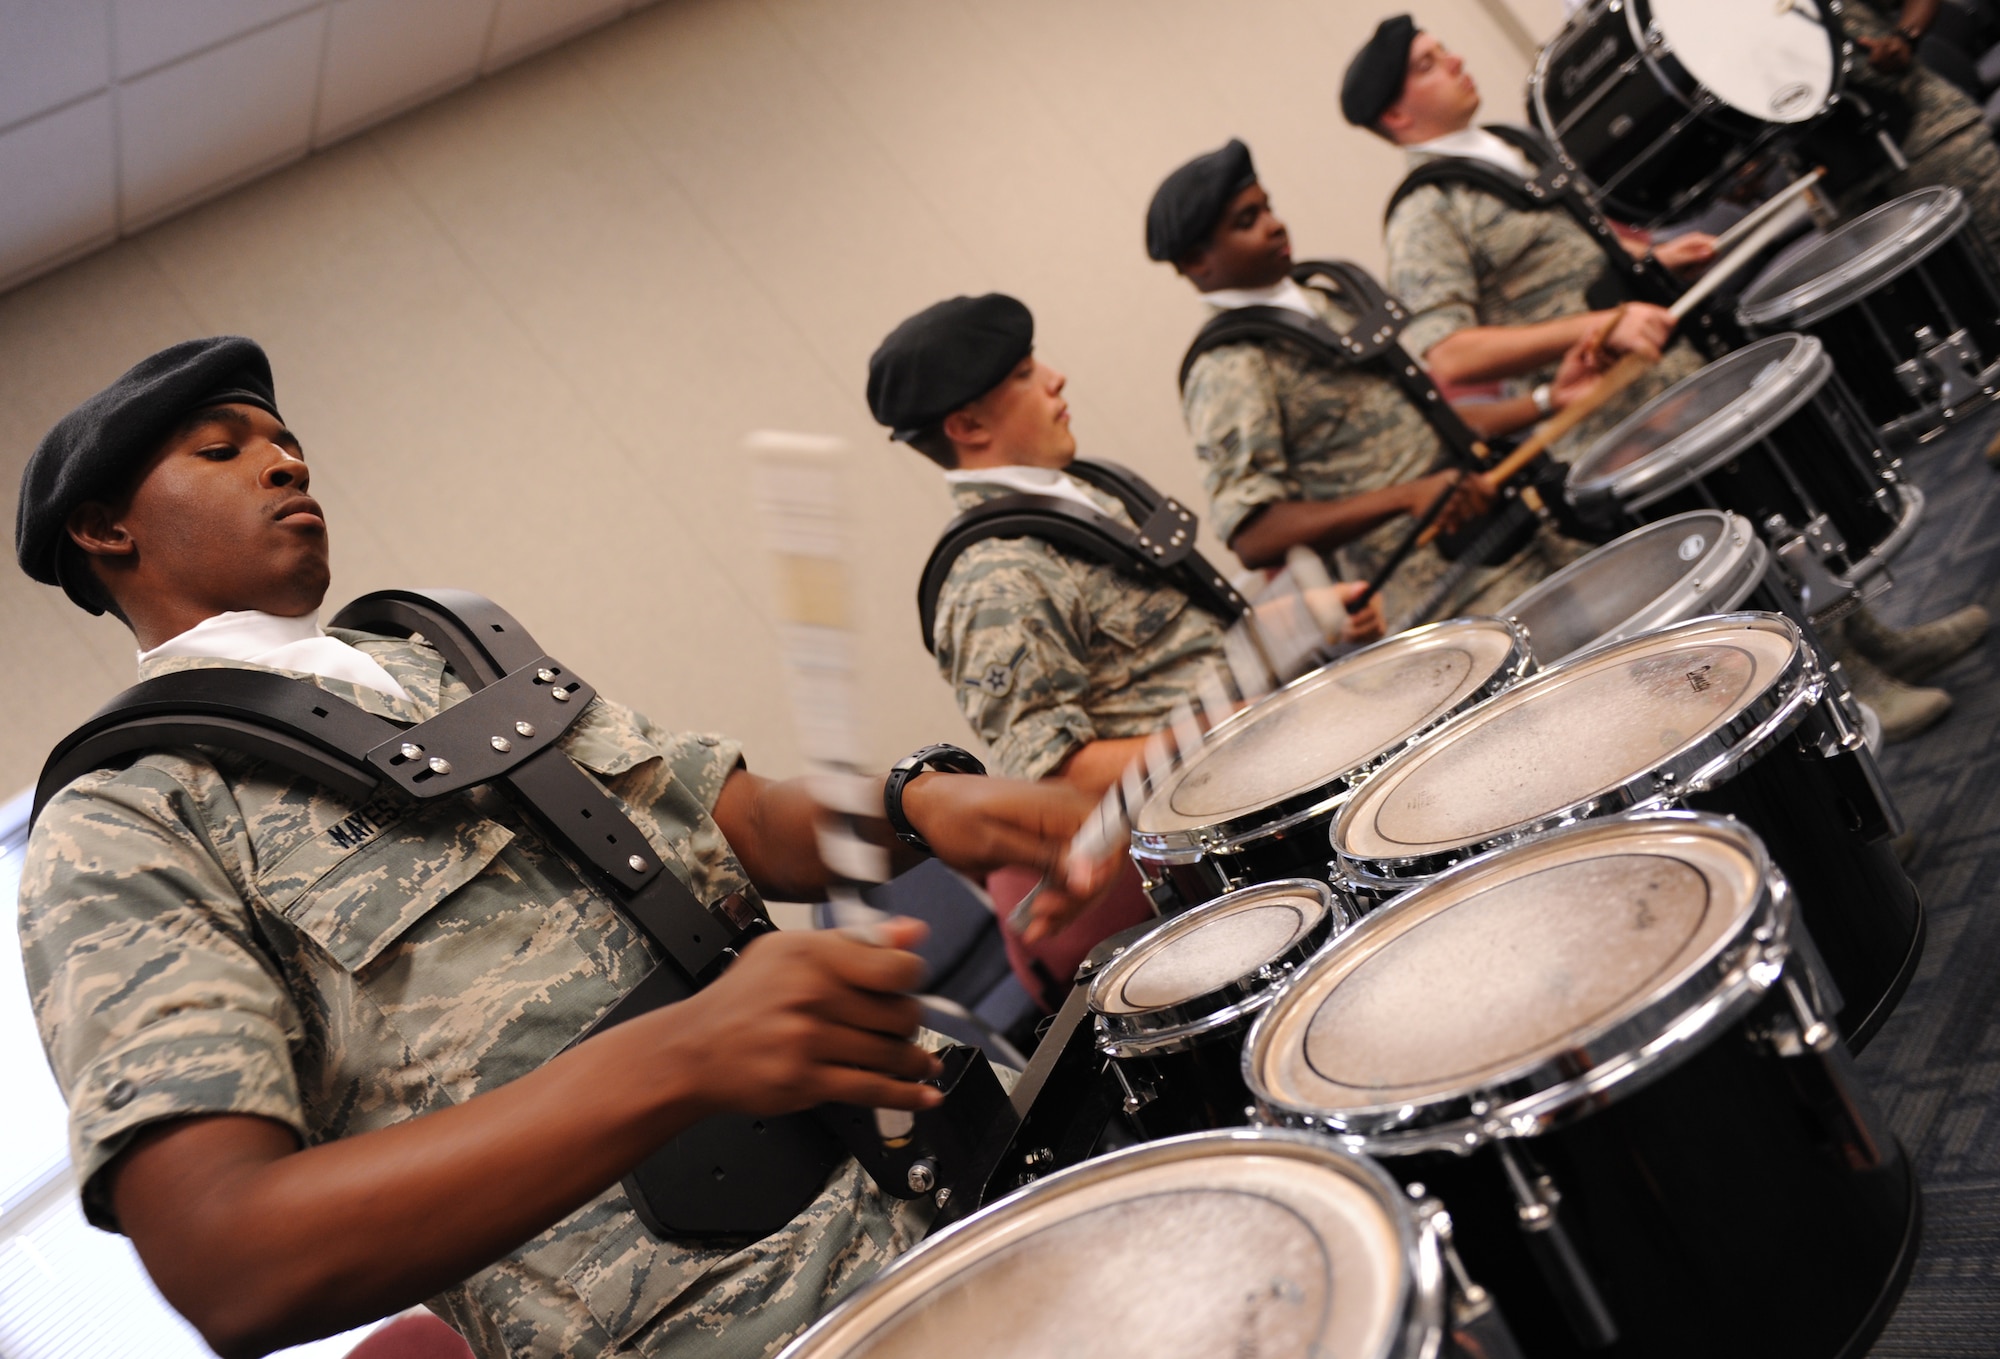 Airman Basic Deandre Mayes, 81st Training Wing Drum and Bugle Corps tenor drum player, plays a musical piece during a practice session at the Levitow Training Support Facility May 31, 2016, Keesler Air Force Base, Miss. The drum and bugle corps performs at various events such as 81st Training Group student parades and drill downs in addition to attending Air Force specialty code technical training on a daily basis. (U.S. Air Force photo by Kemberly Groue)